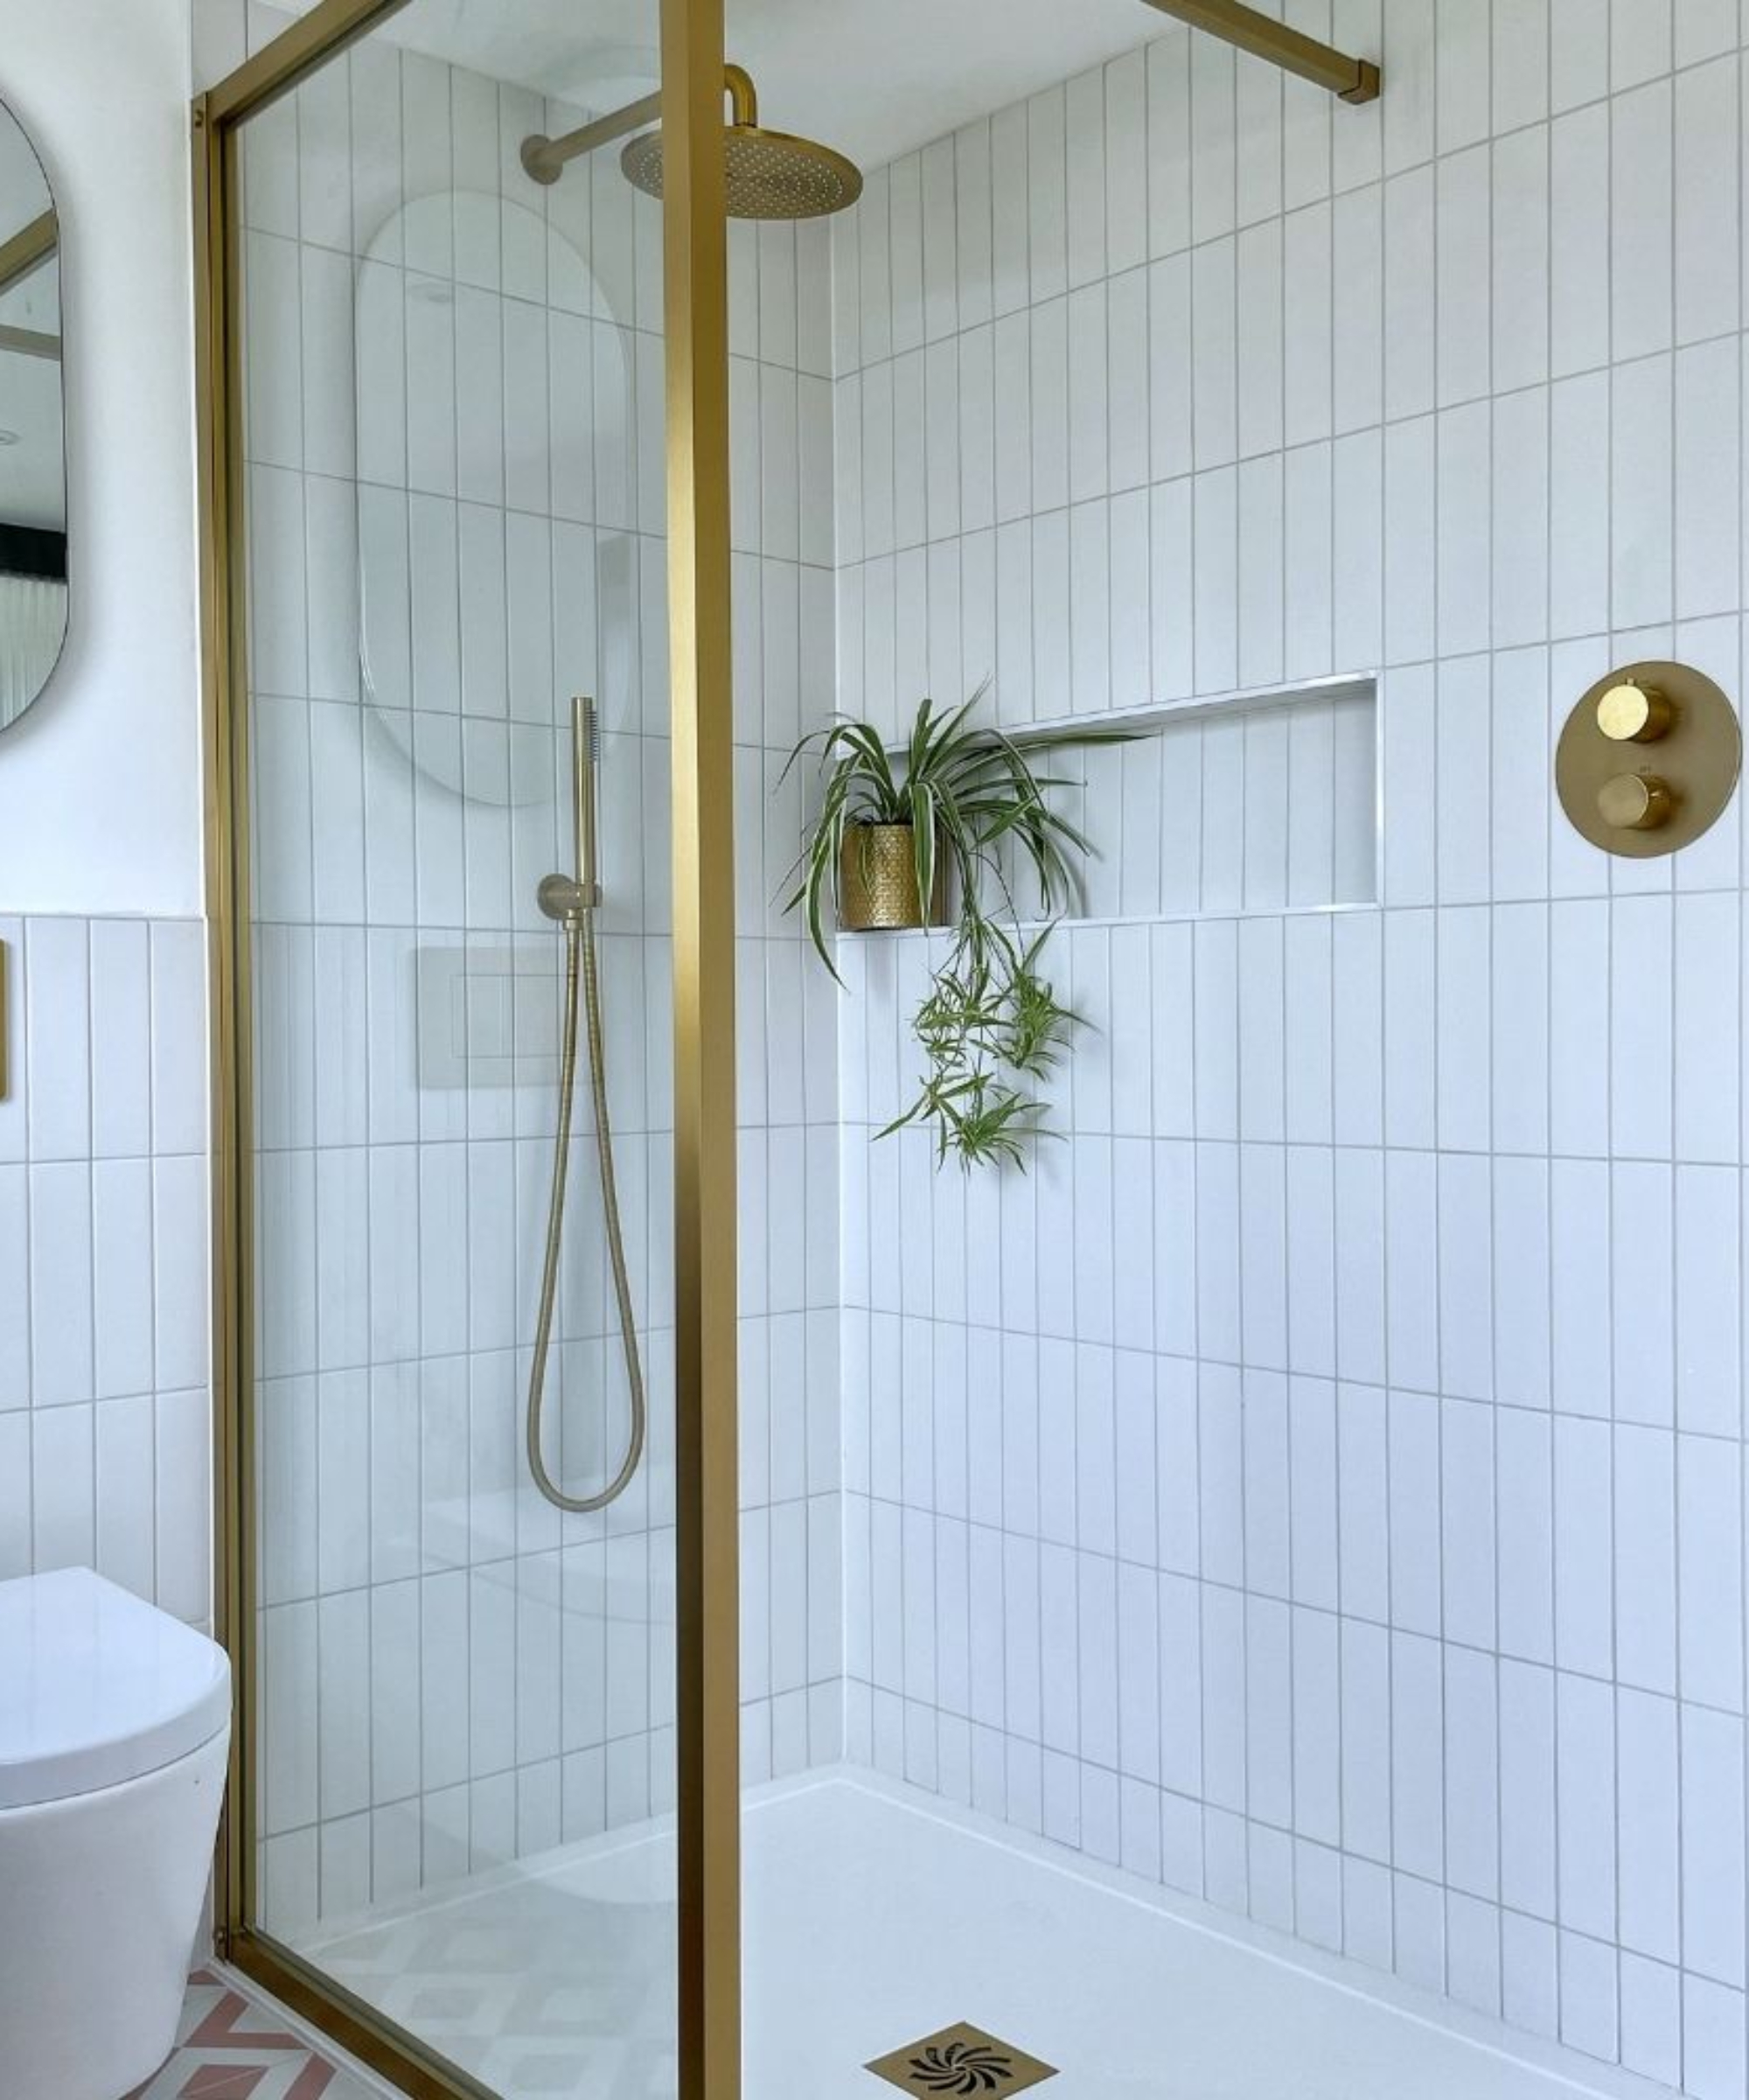 gold framed shower screen with recessed shelf in wall